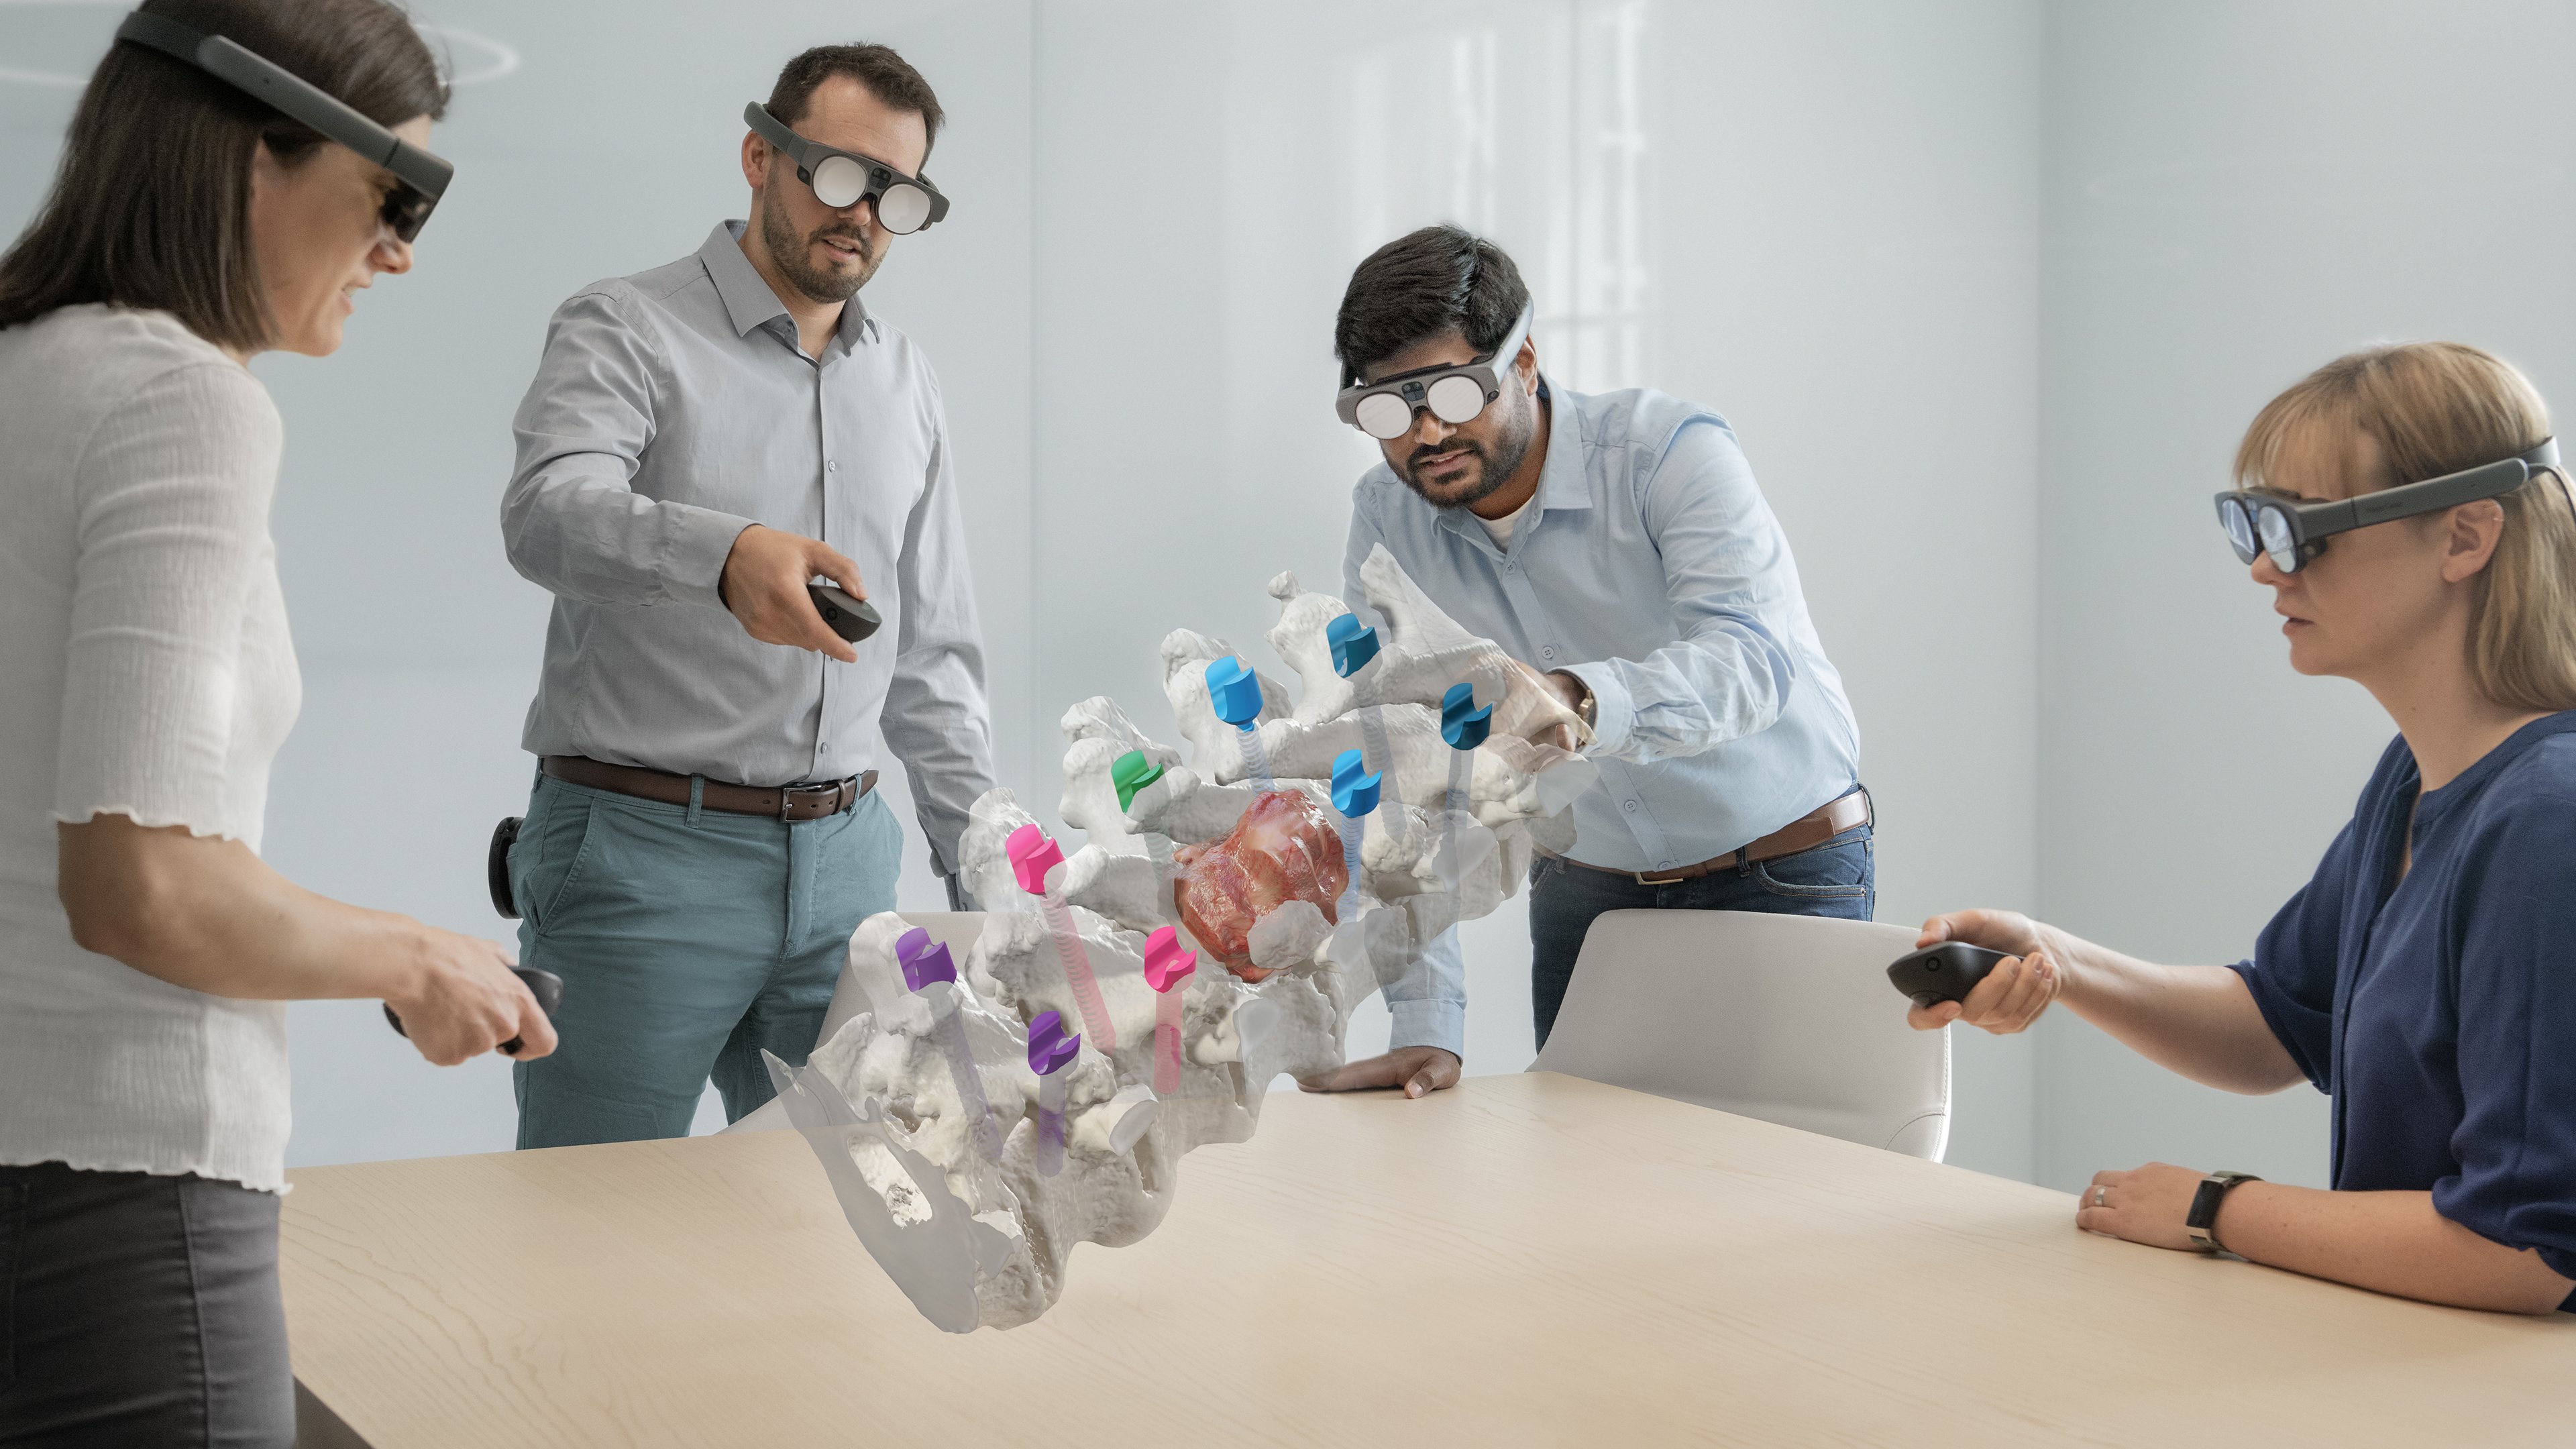 Brainlab's Mixed Reality Viewer in use, with four individuals in an office setting examining a spinal image